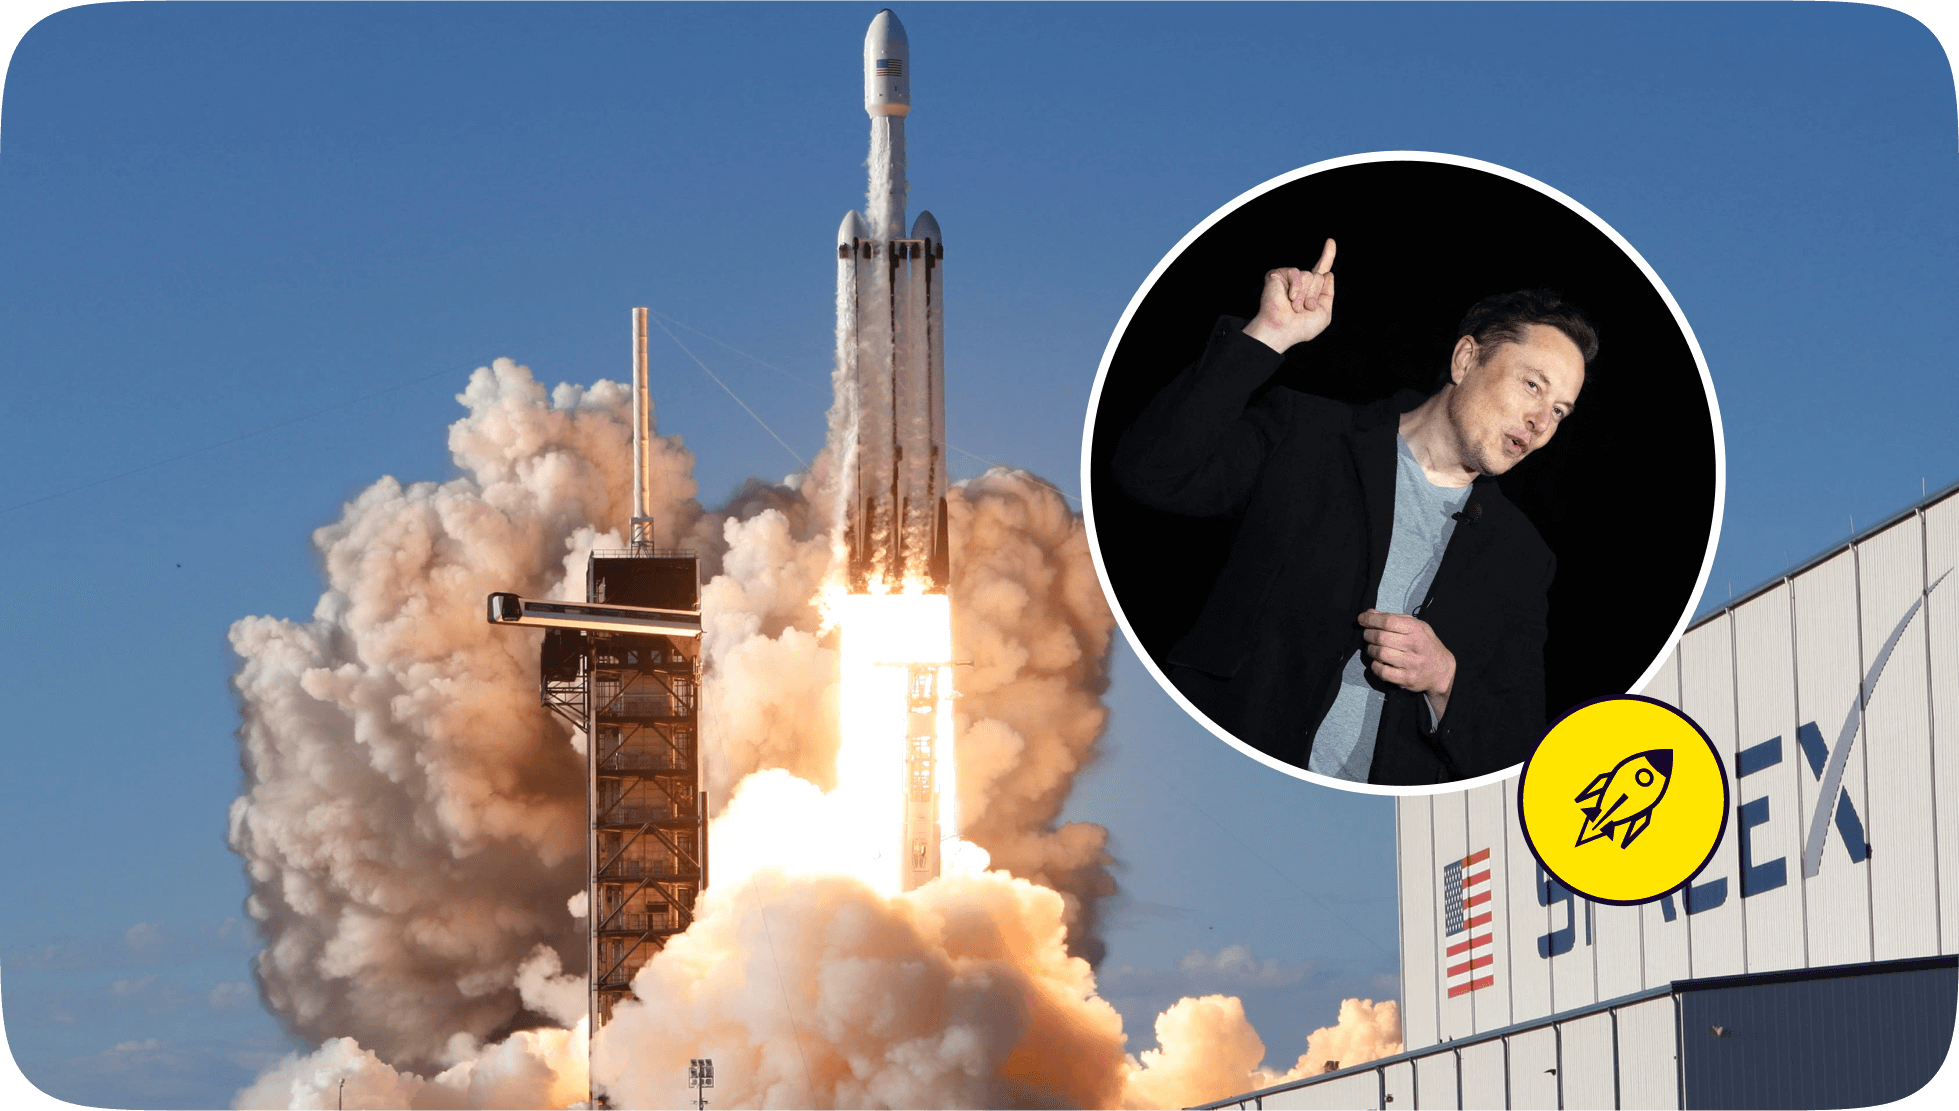 Elon Musk and SpaceX